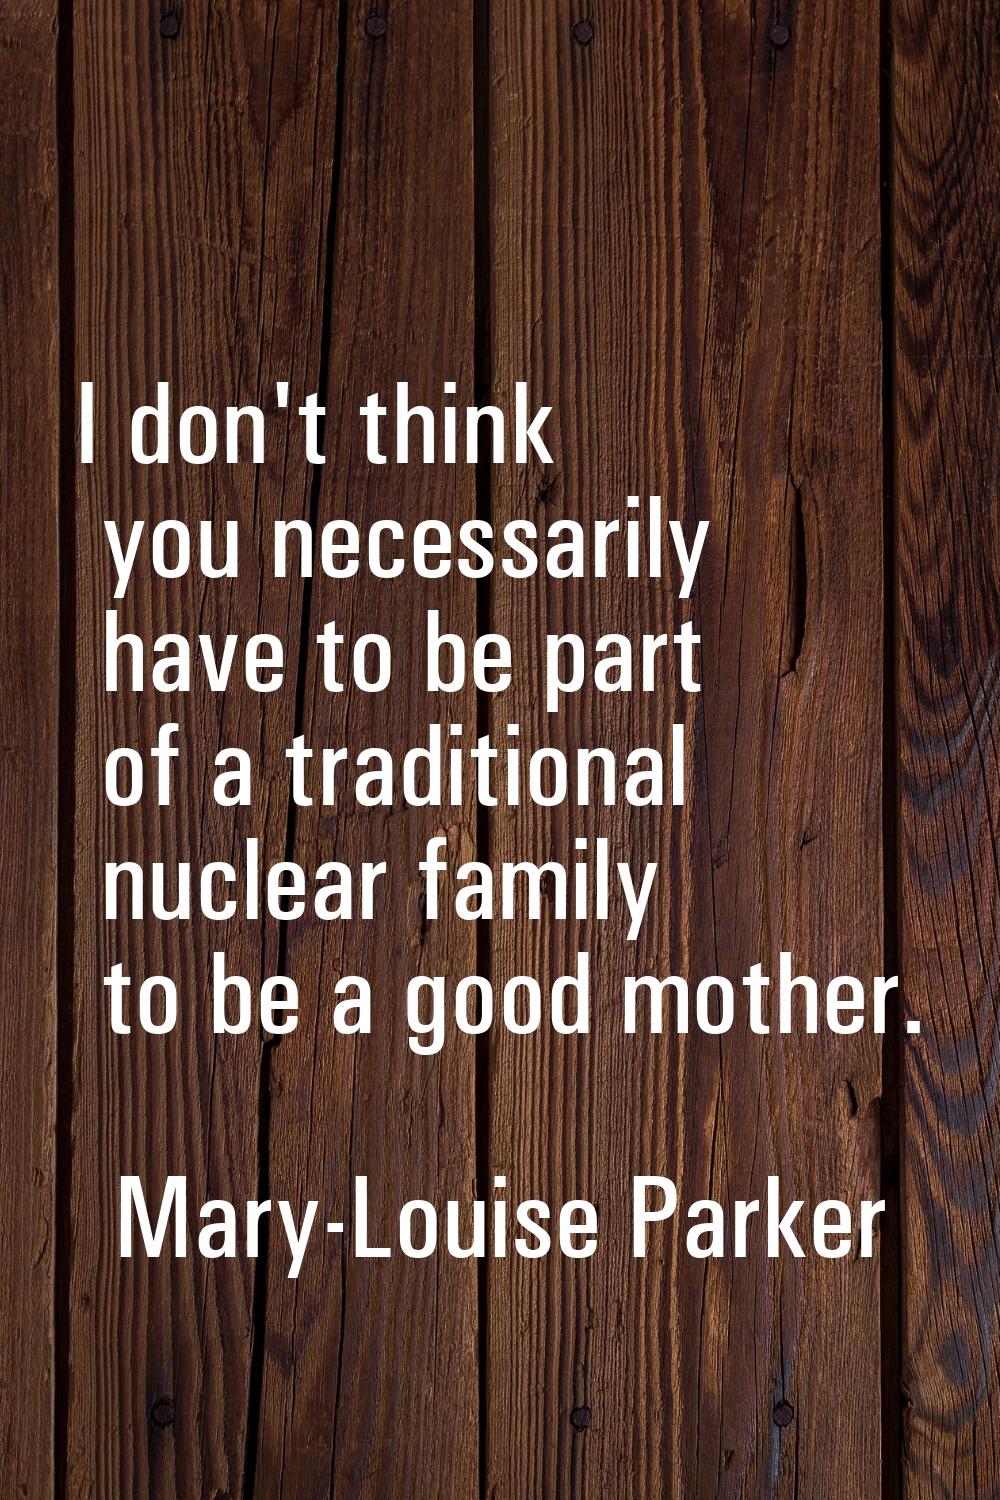 I don't think you necessarily have to be part of a traditional nuclear family to be a good mother.